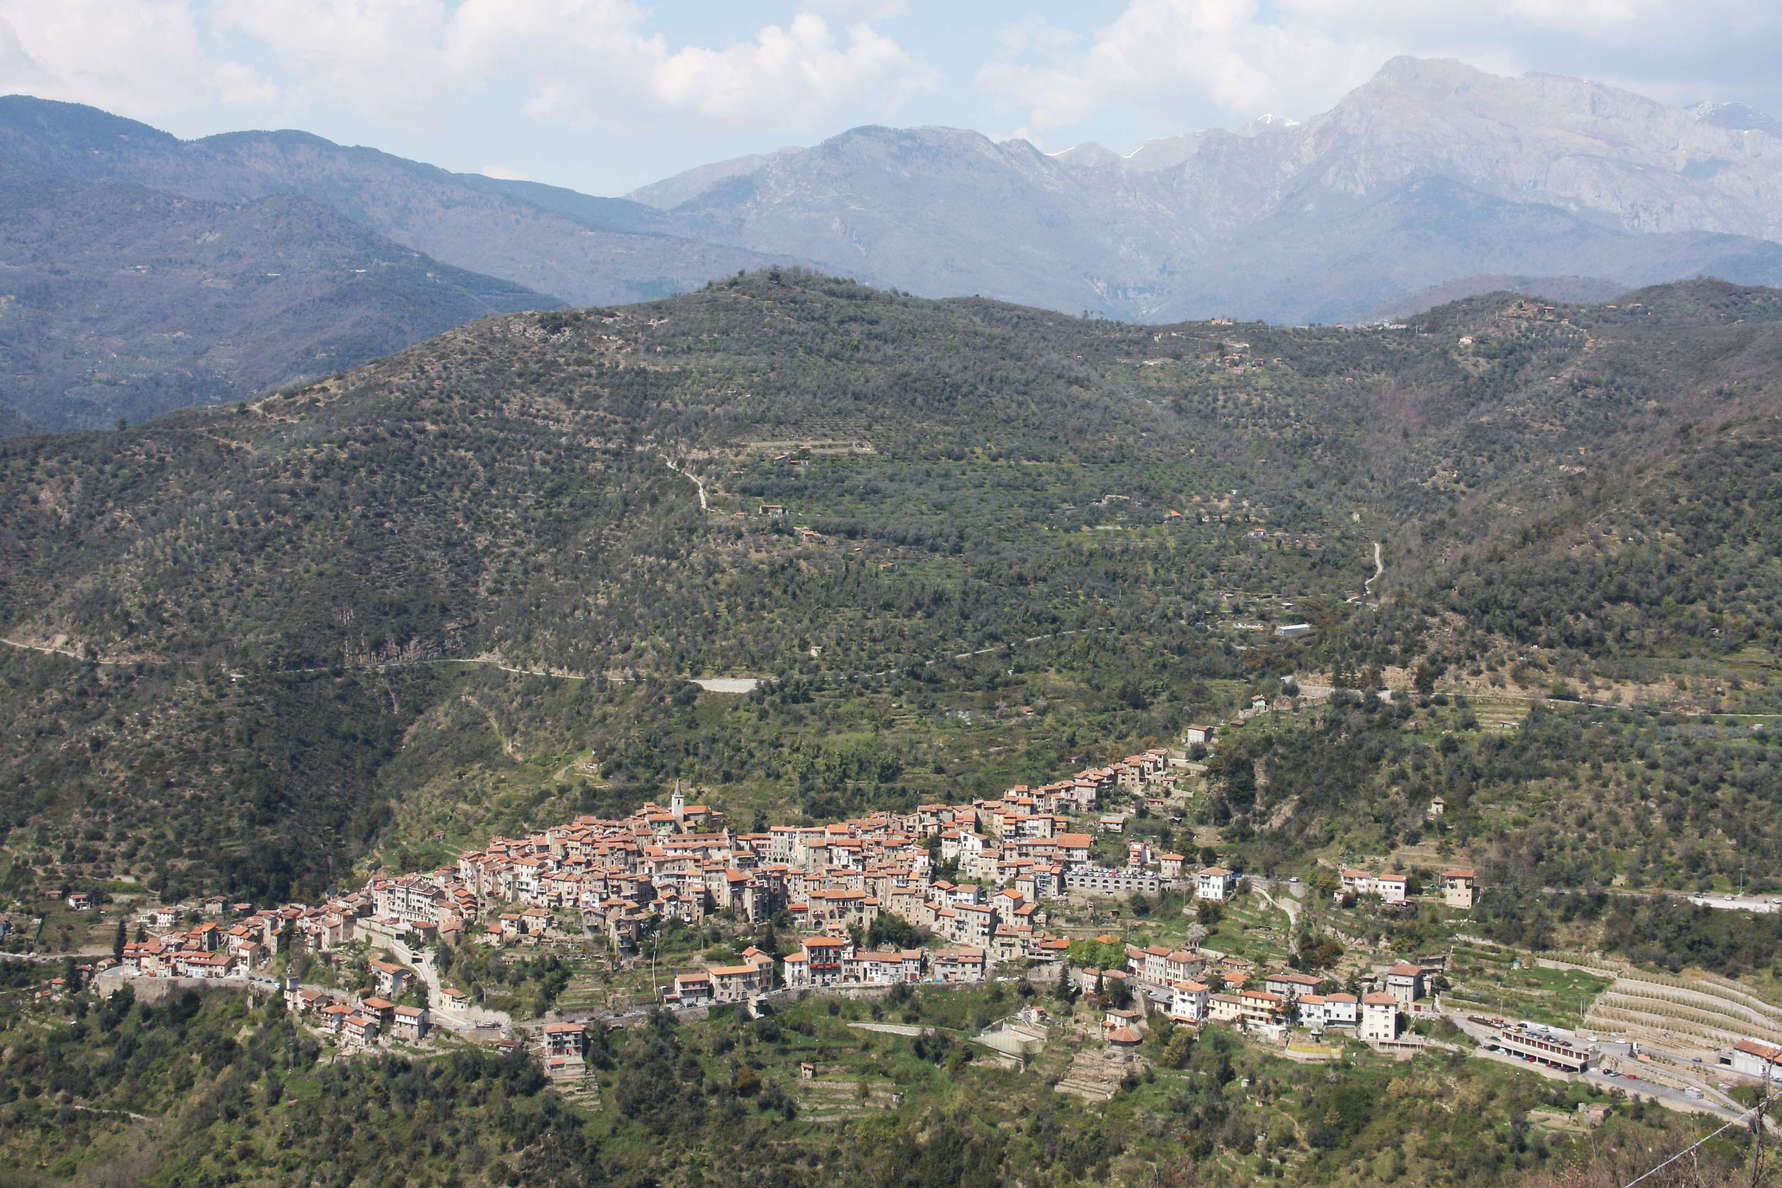 Ligurian Alps with Apricale